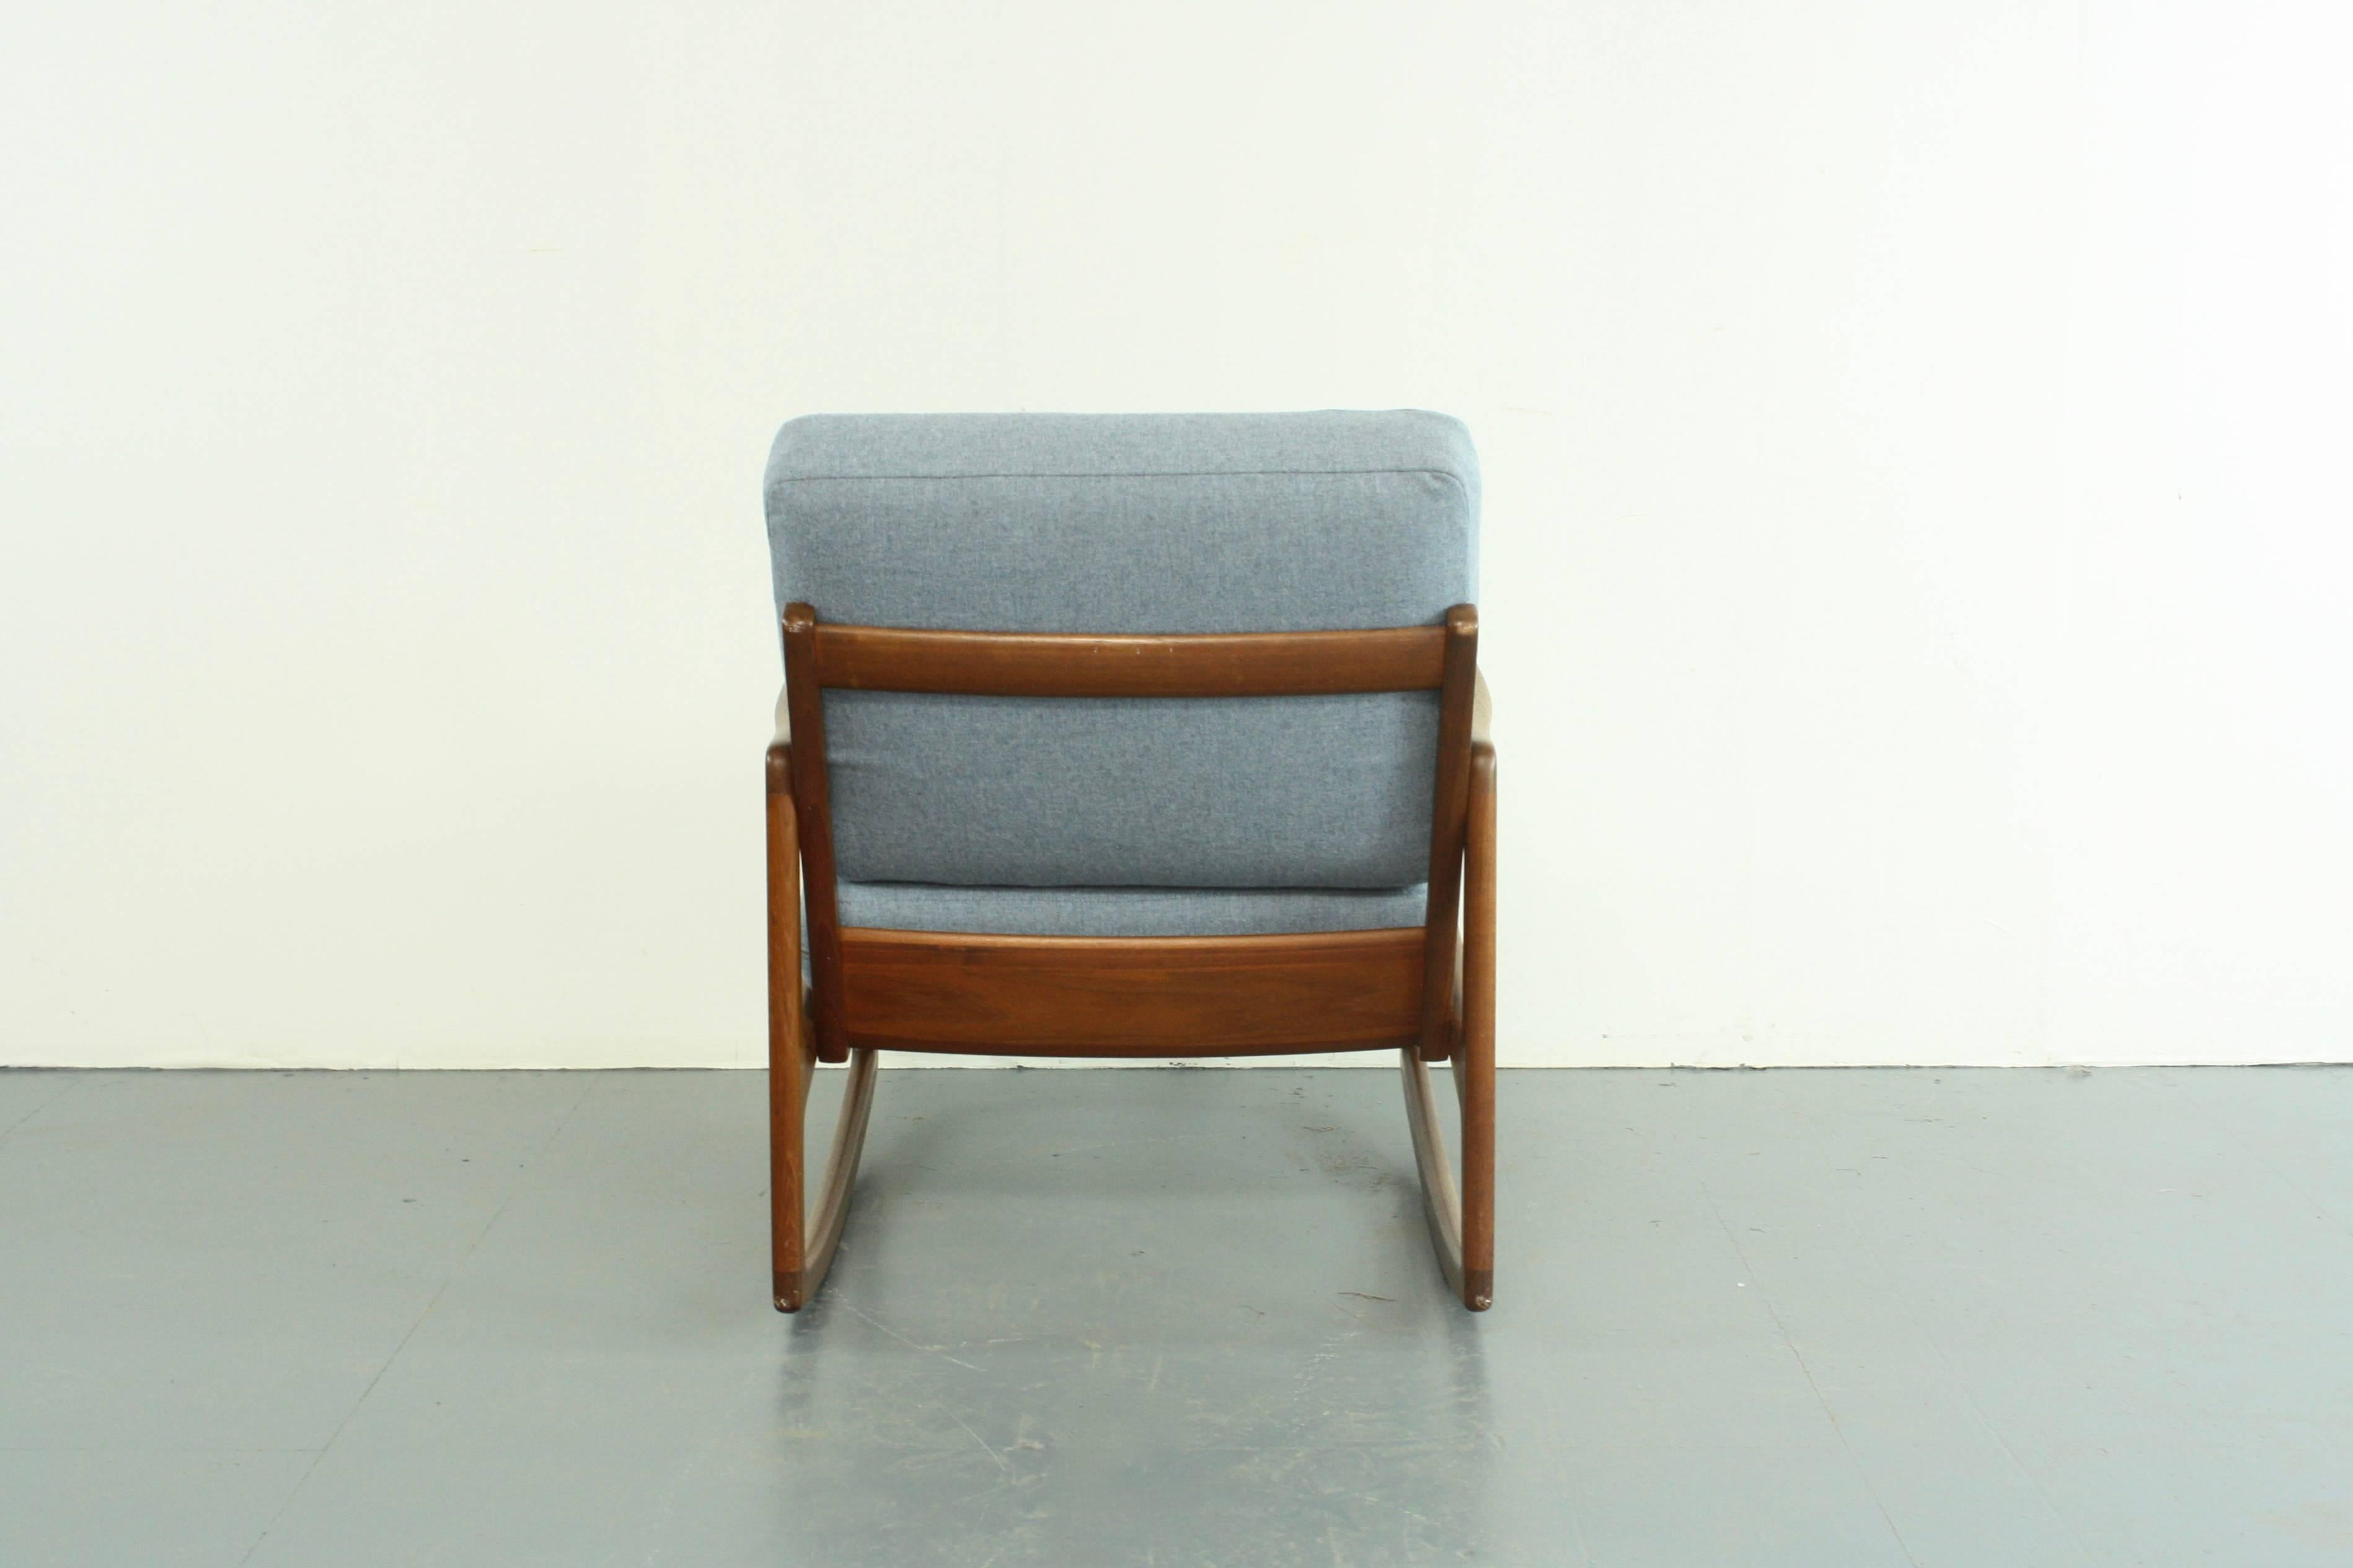 Vintage Midcentury Teak Rocking Chair by Ole Wanscher for France & Son, Denmark For Sale 1